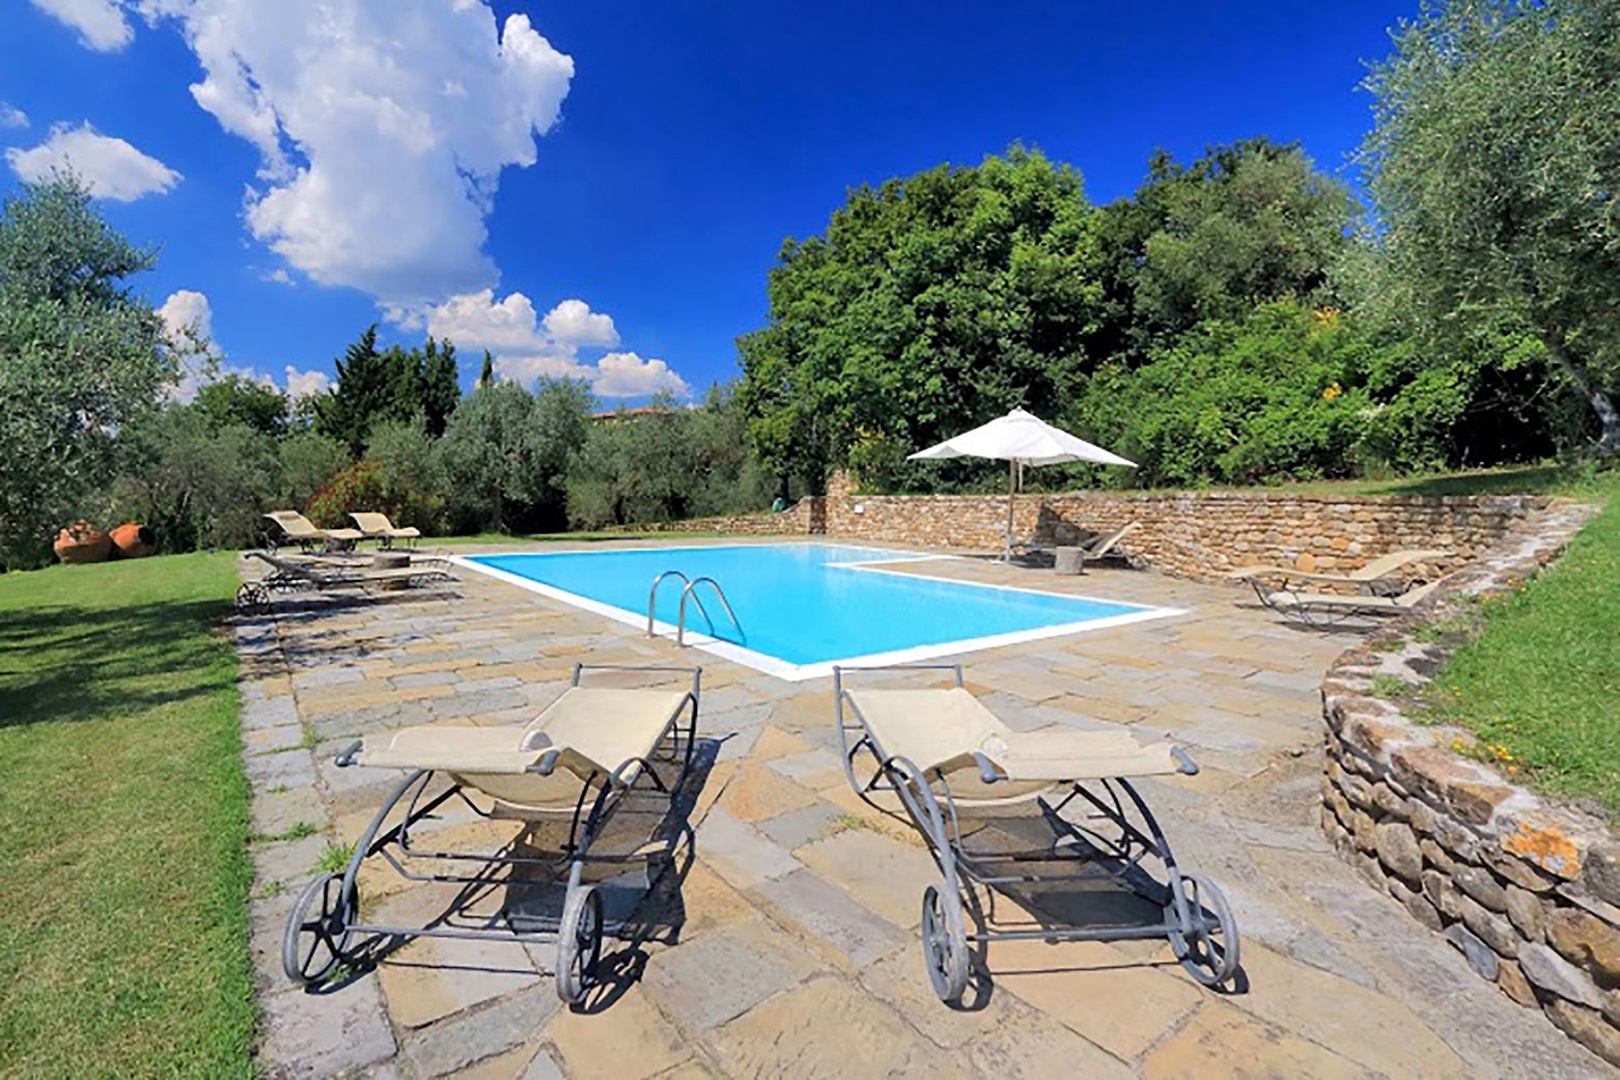 The villa has a private pool that is 5 x 10 meters or 16 x 33 feet.